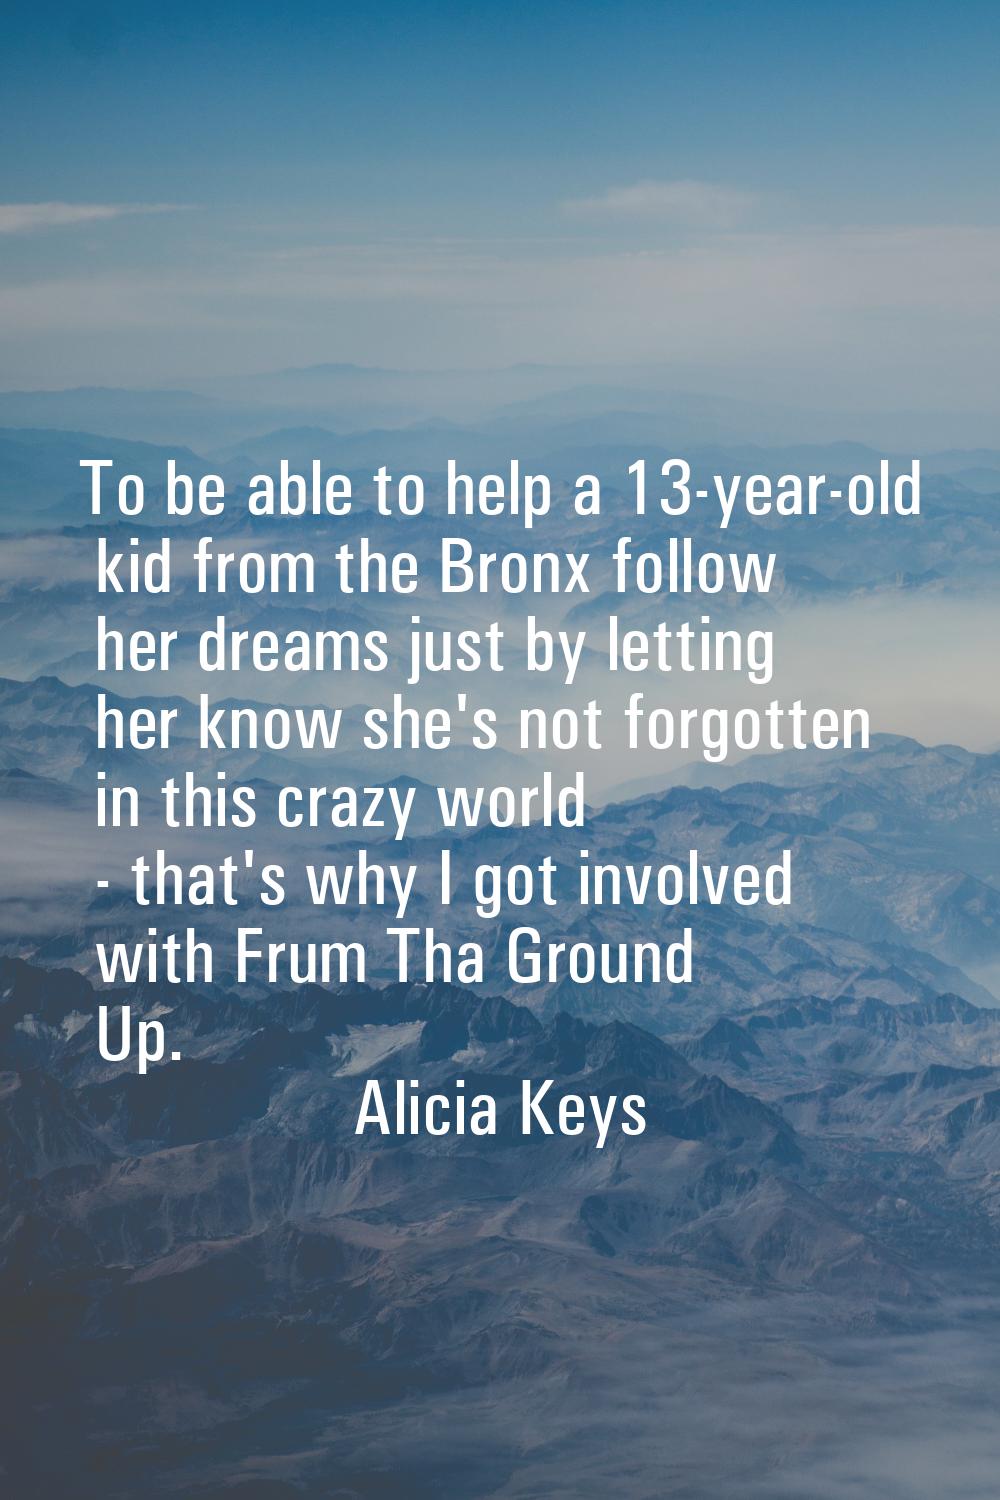 To be able to help a 13-year-old kid from the Bronx follow her dreams just by letting her know she'